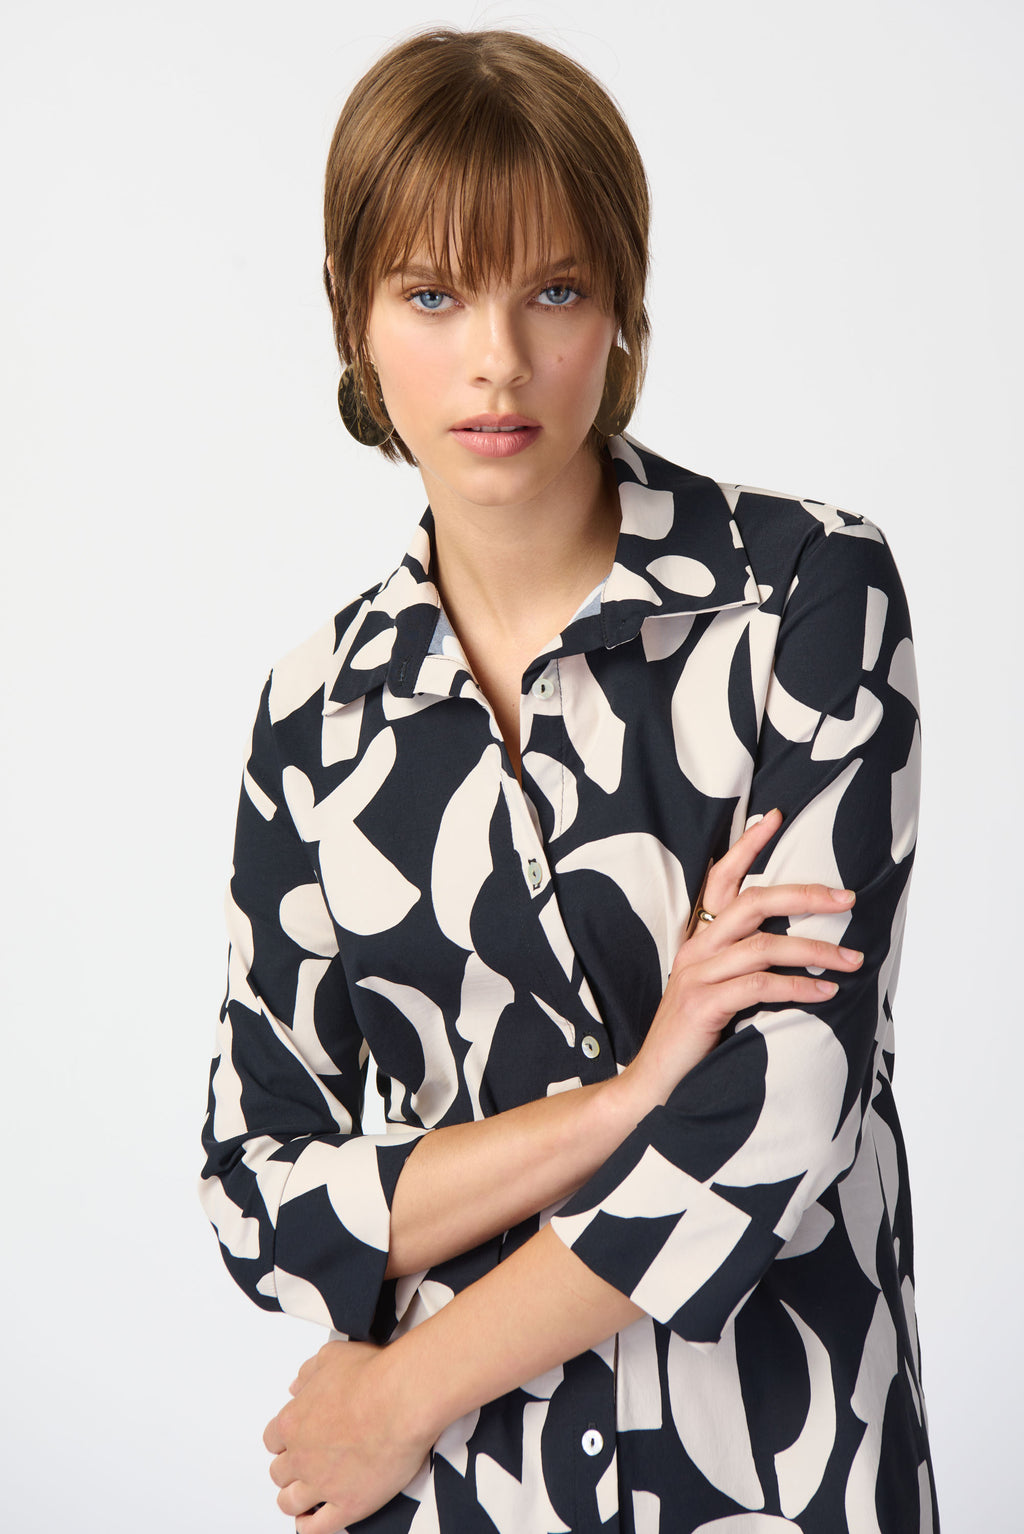 Embrace a chic, carefree look with this airy stretch poplin trapeze dress. Featuring three-quarter sleeves and an intricate shirt collar, this dress strikes the perfect balance between comfort and sophistication. The buttoned opening at the front adds detail, while the lively abstract print enlivens the ensemble.